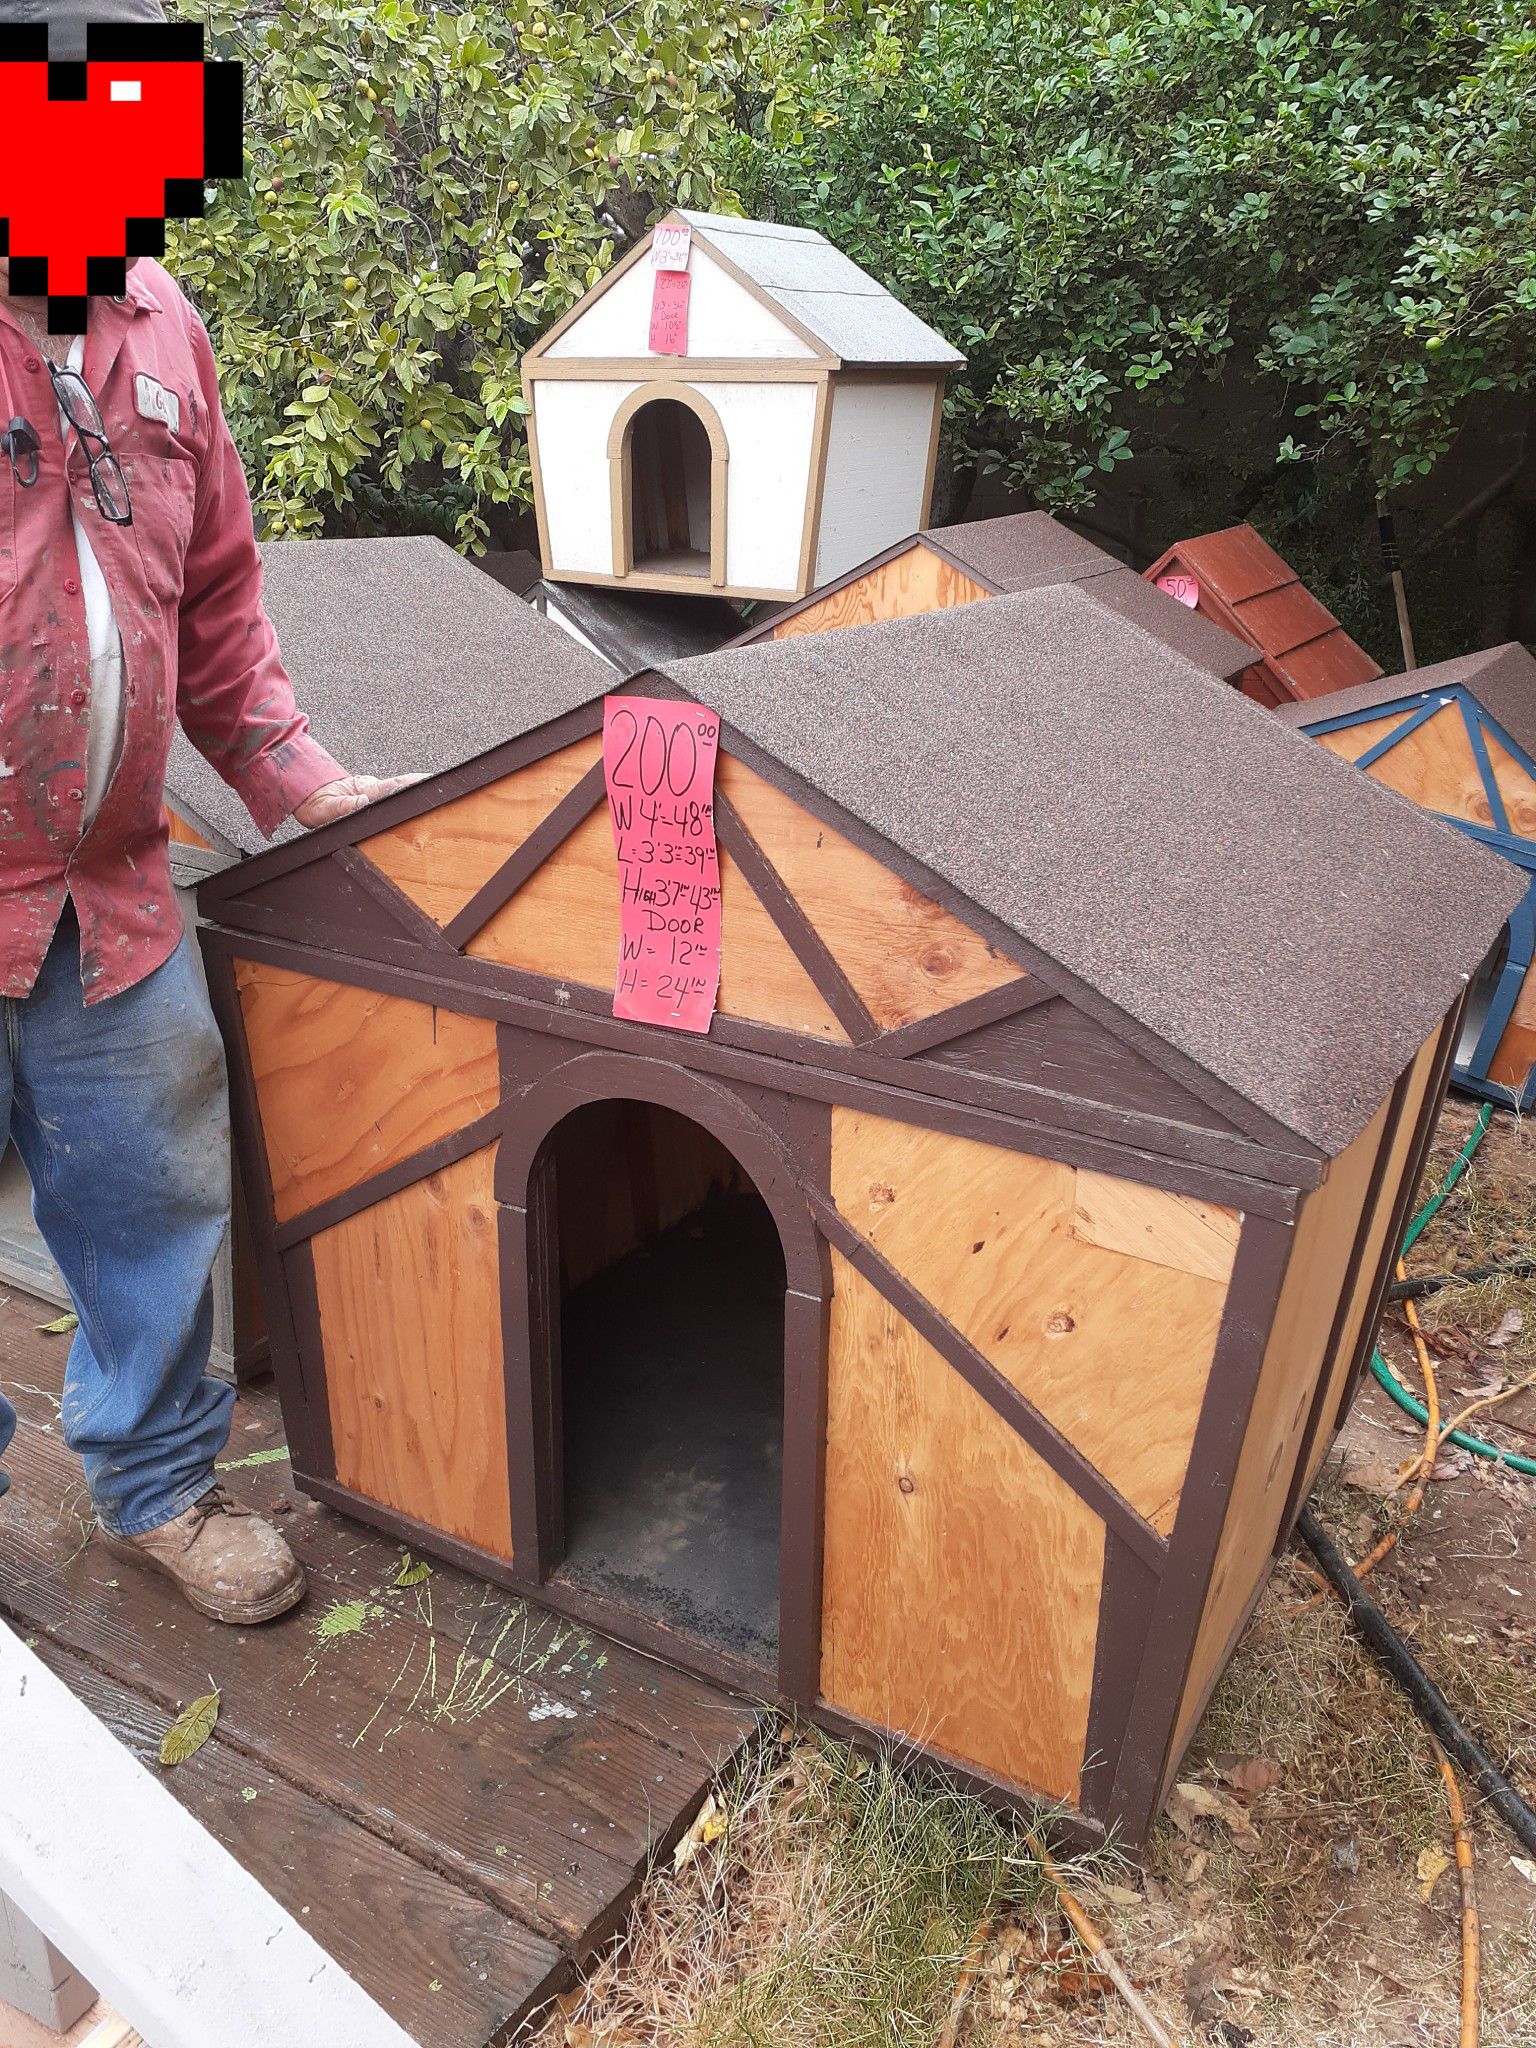 brown dog house for sale $200